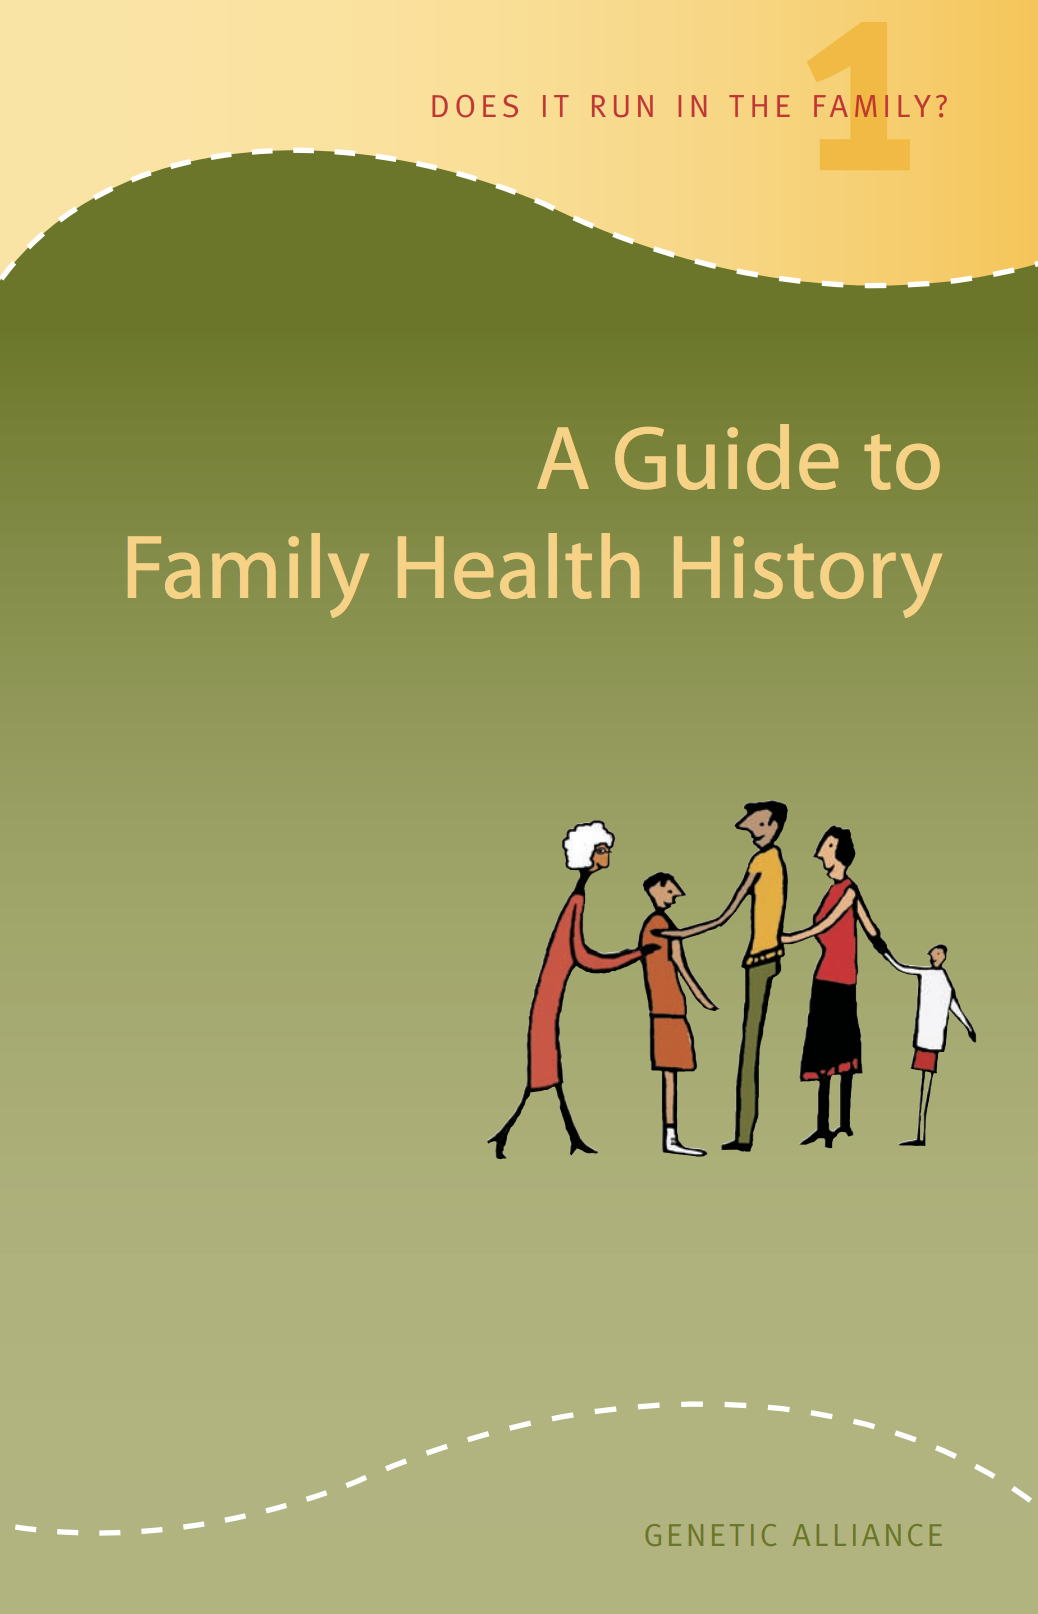 A guide to family health history booklet cover